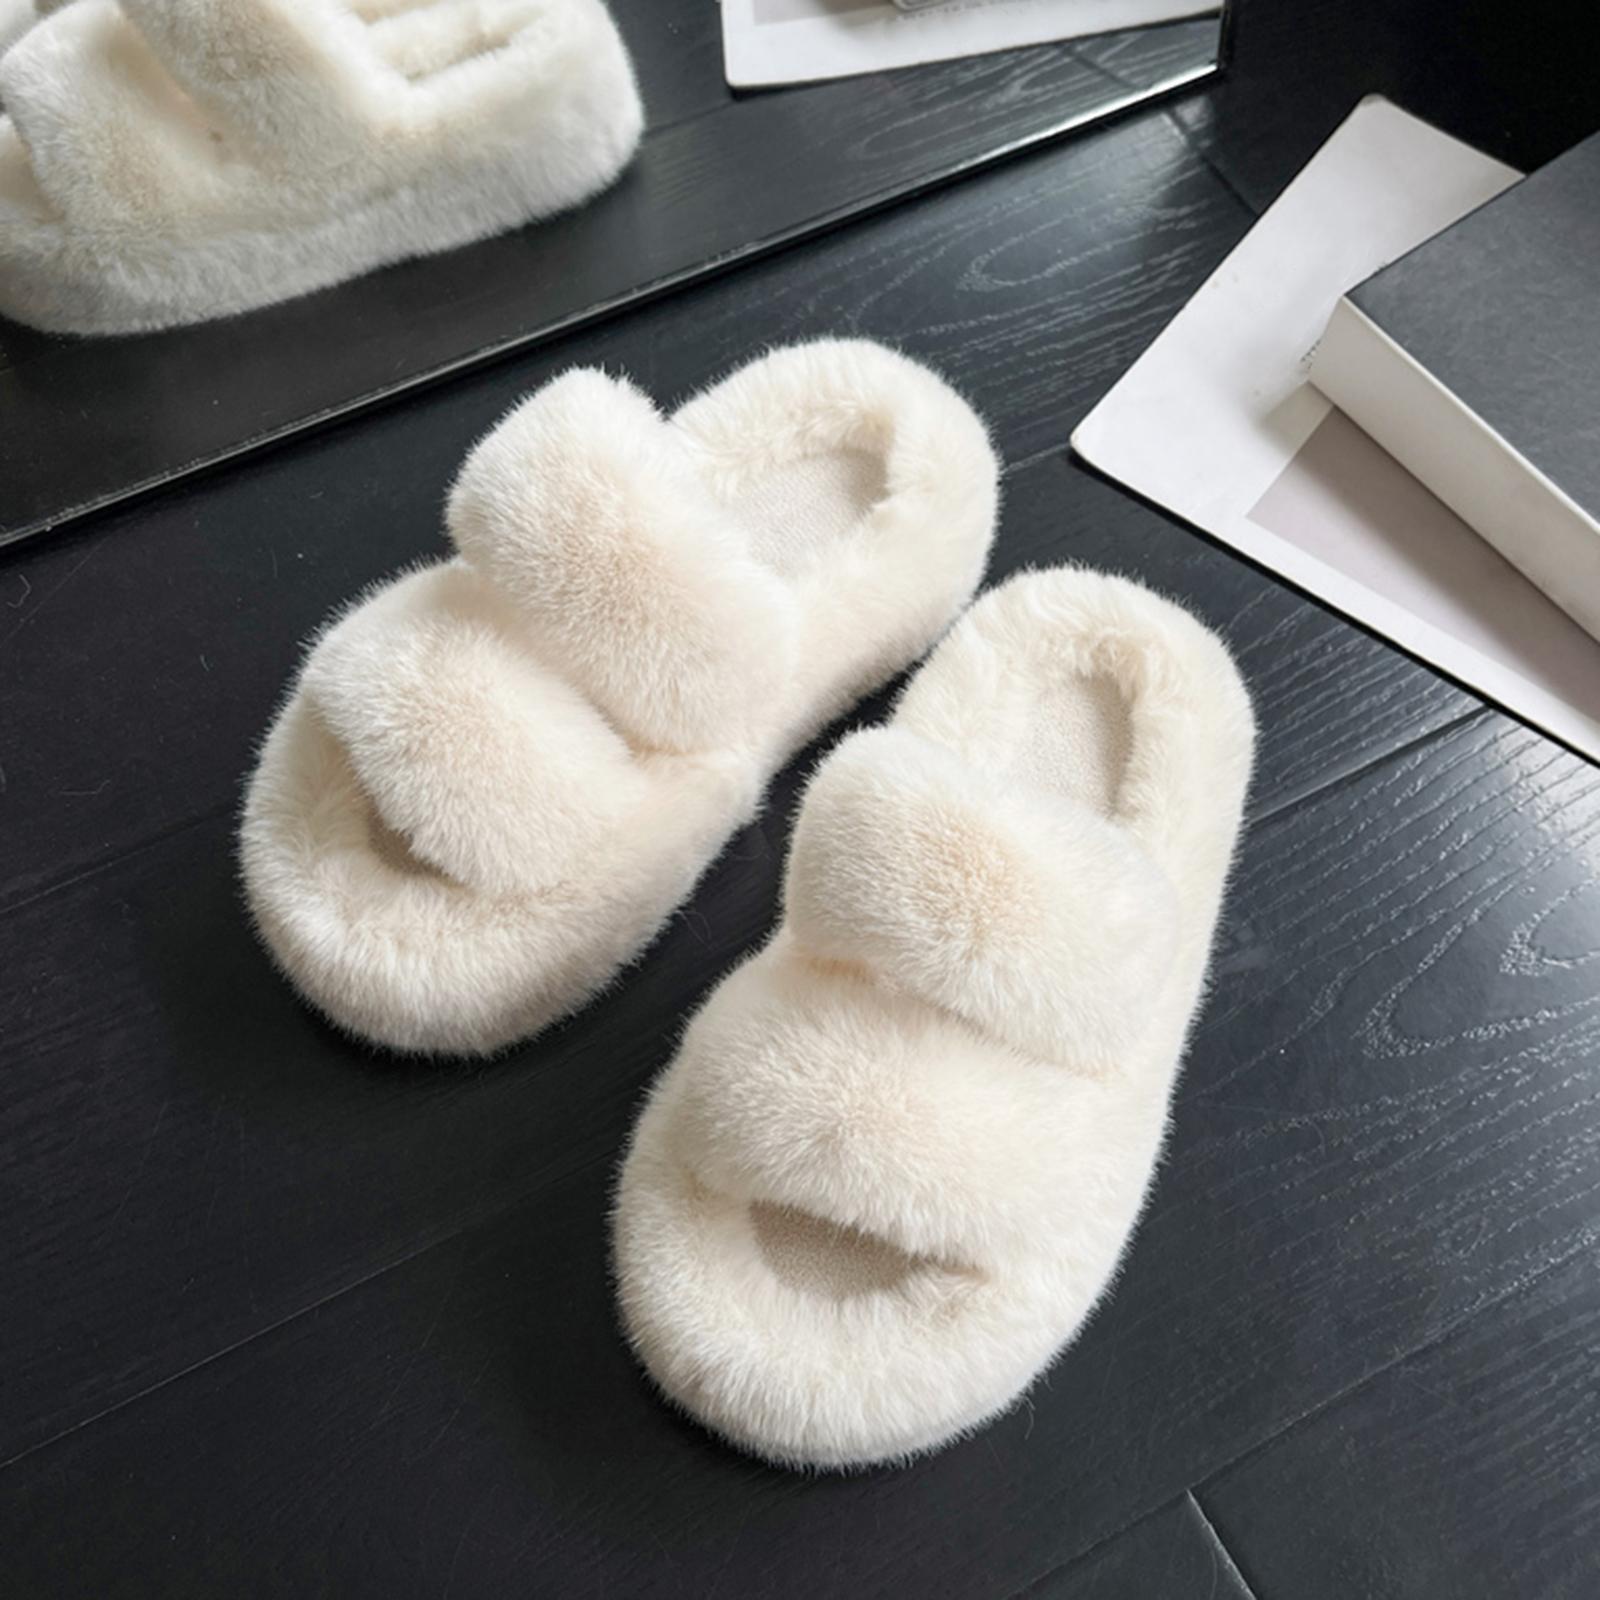 Women Fuzzy Slippers Plush House Shoes with Two Band Fashion Anti Slip Thick Sole Open Toe Slide Slippers Winter Slippers for Bedroom